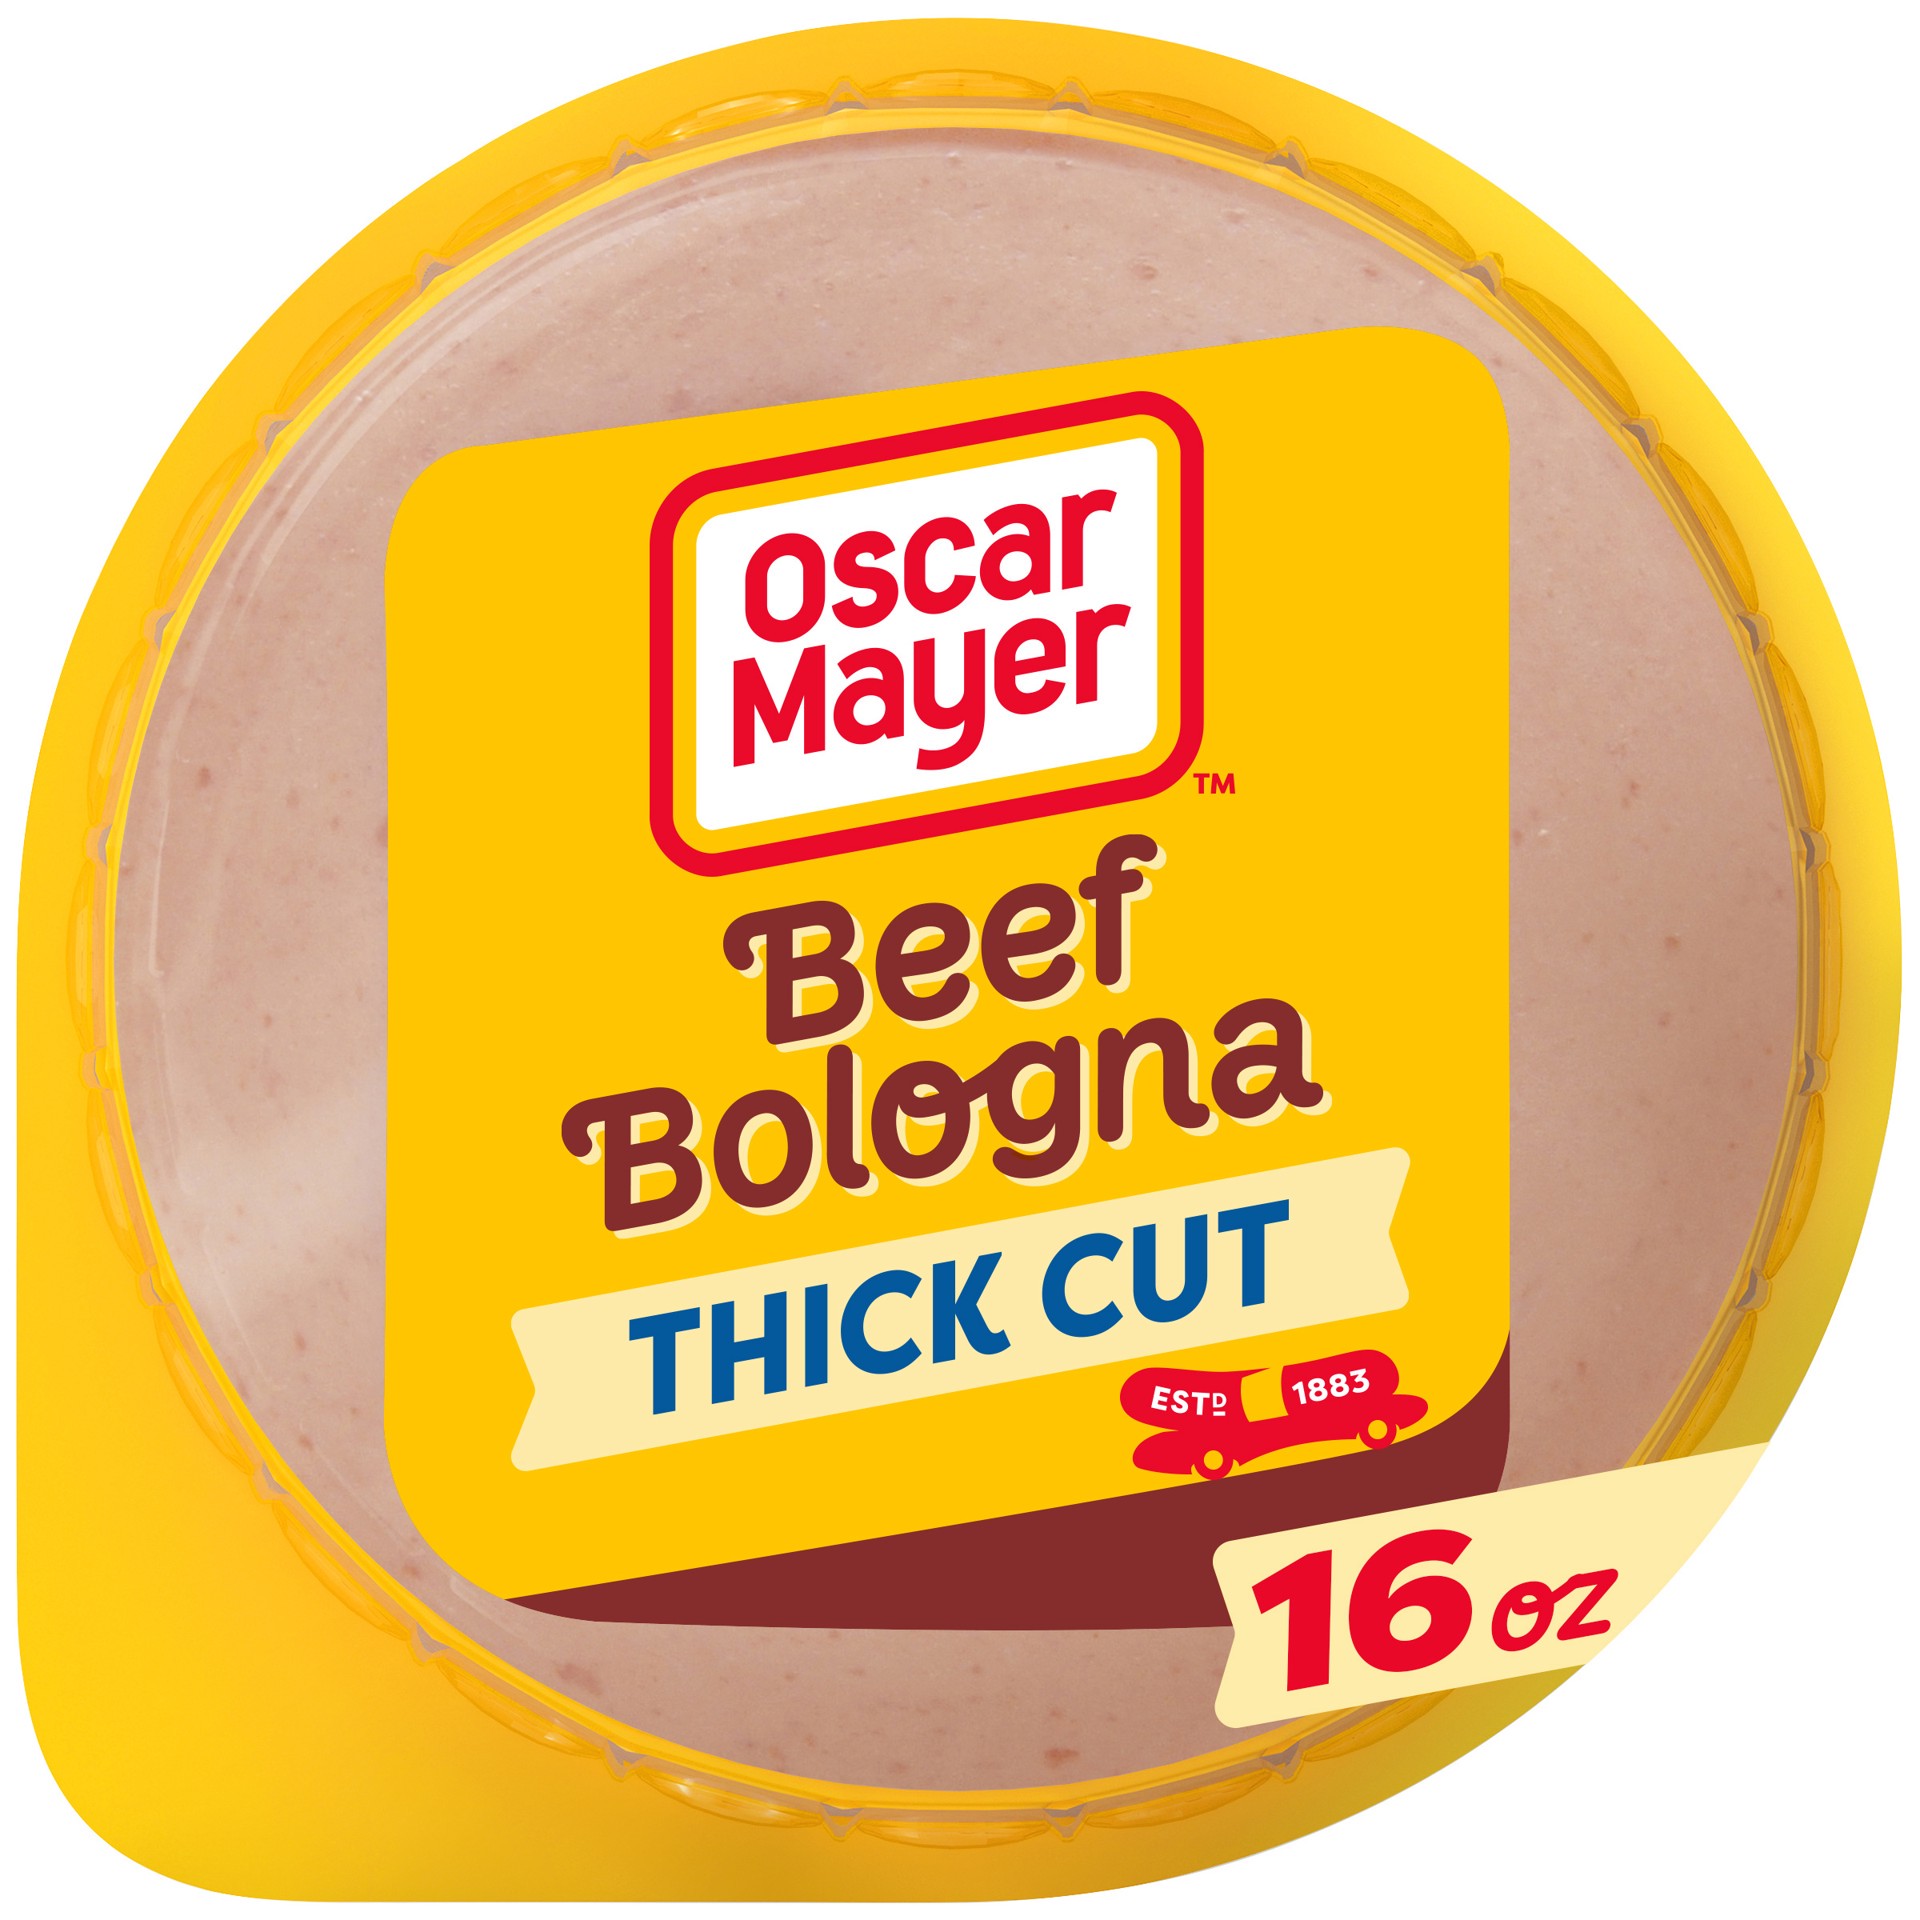 slide 1 of 2, Oscar Mayer Thick Cut Beef Bologna Sliced Lunch Meat, 16 oz. Pack, 16 oz